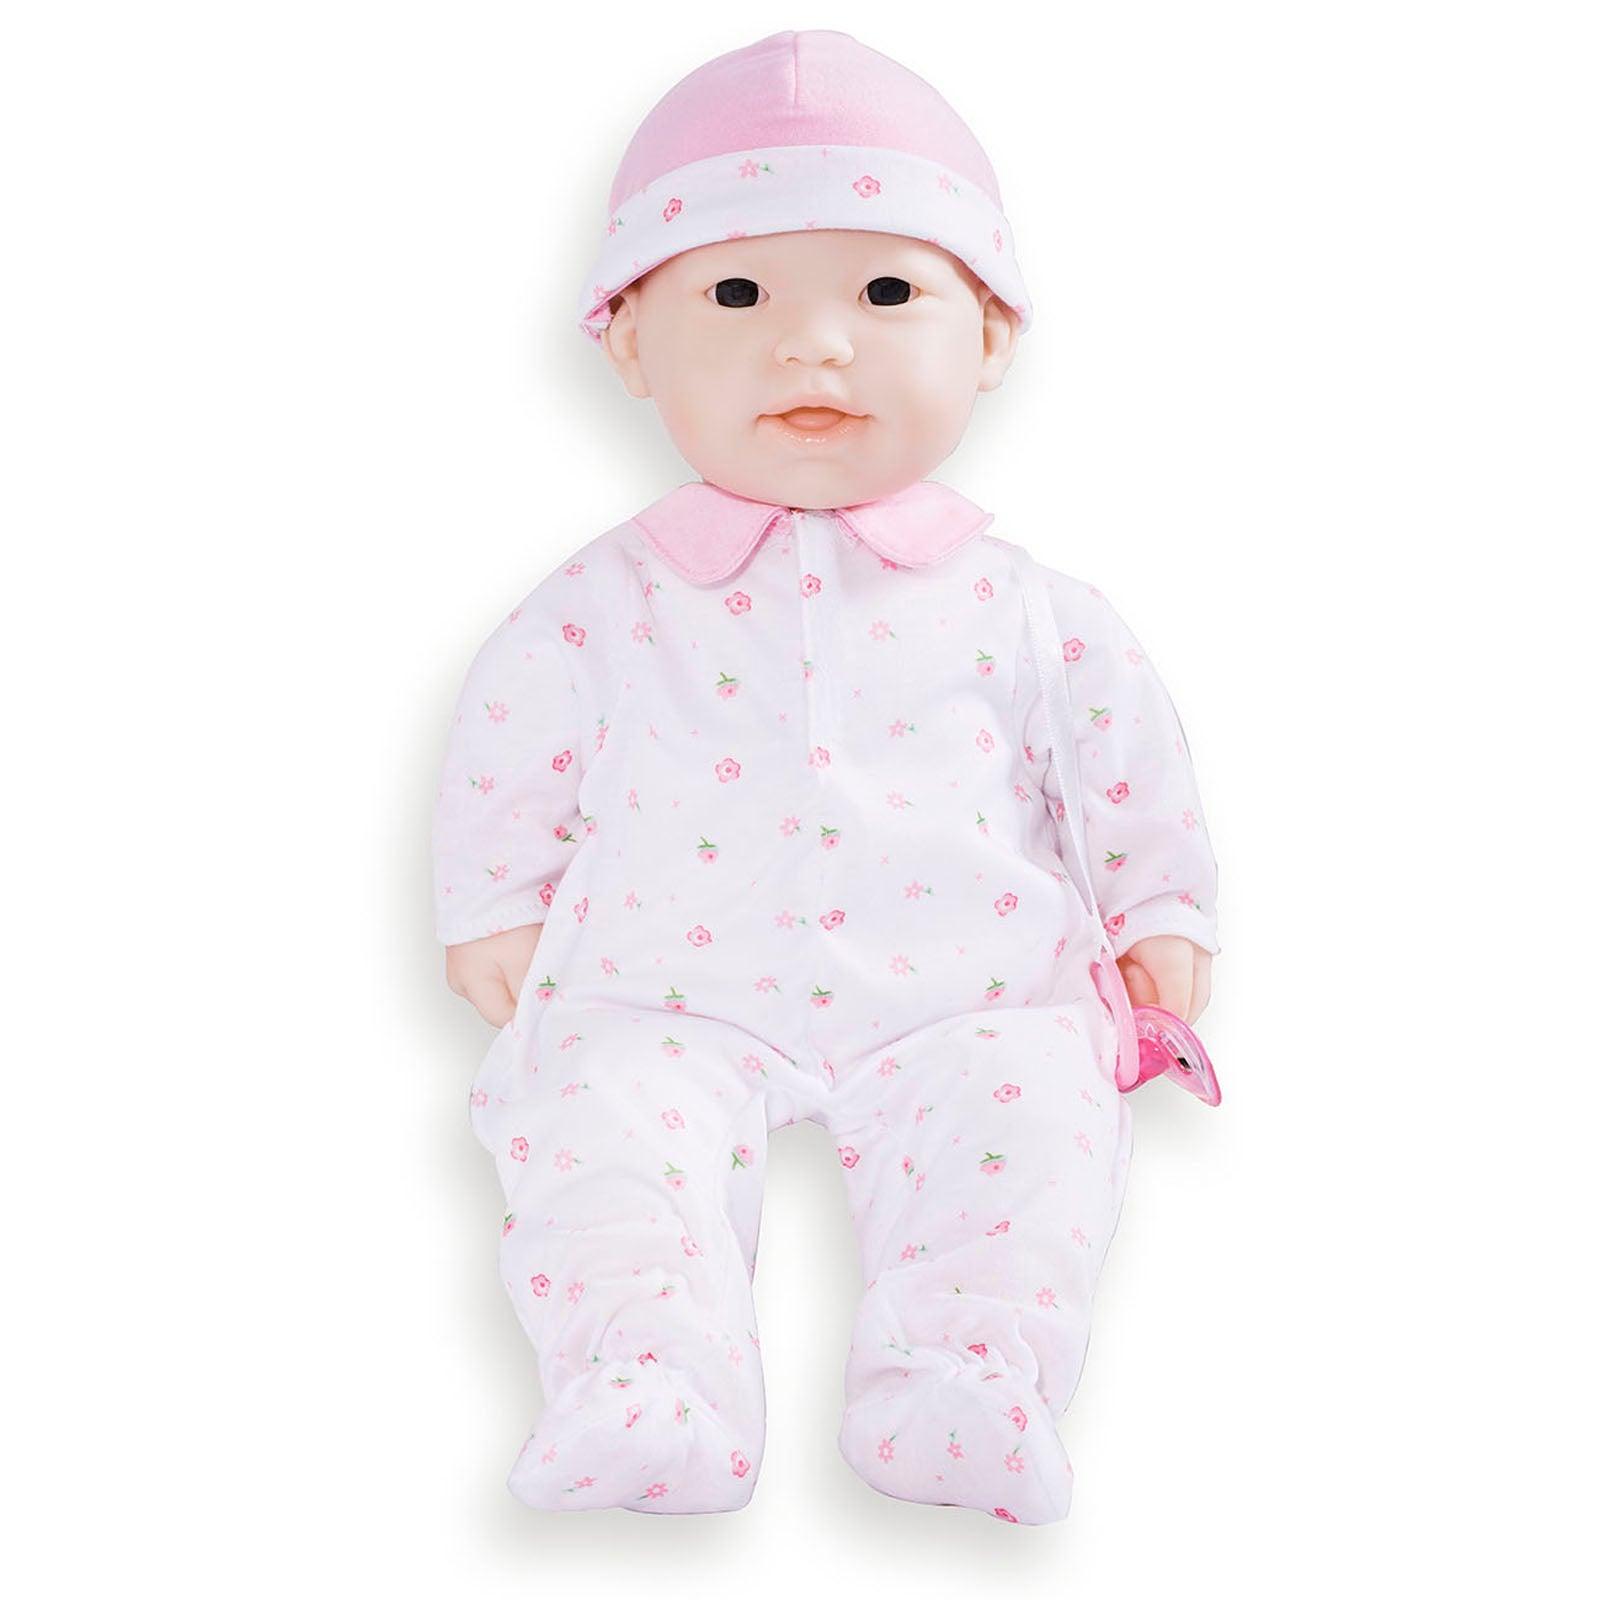 La Baby Soft 16" Baby Doll, Pink with Pacifier, Asian - Loomini